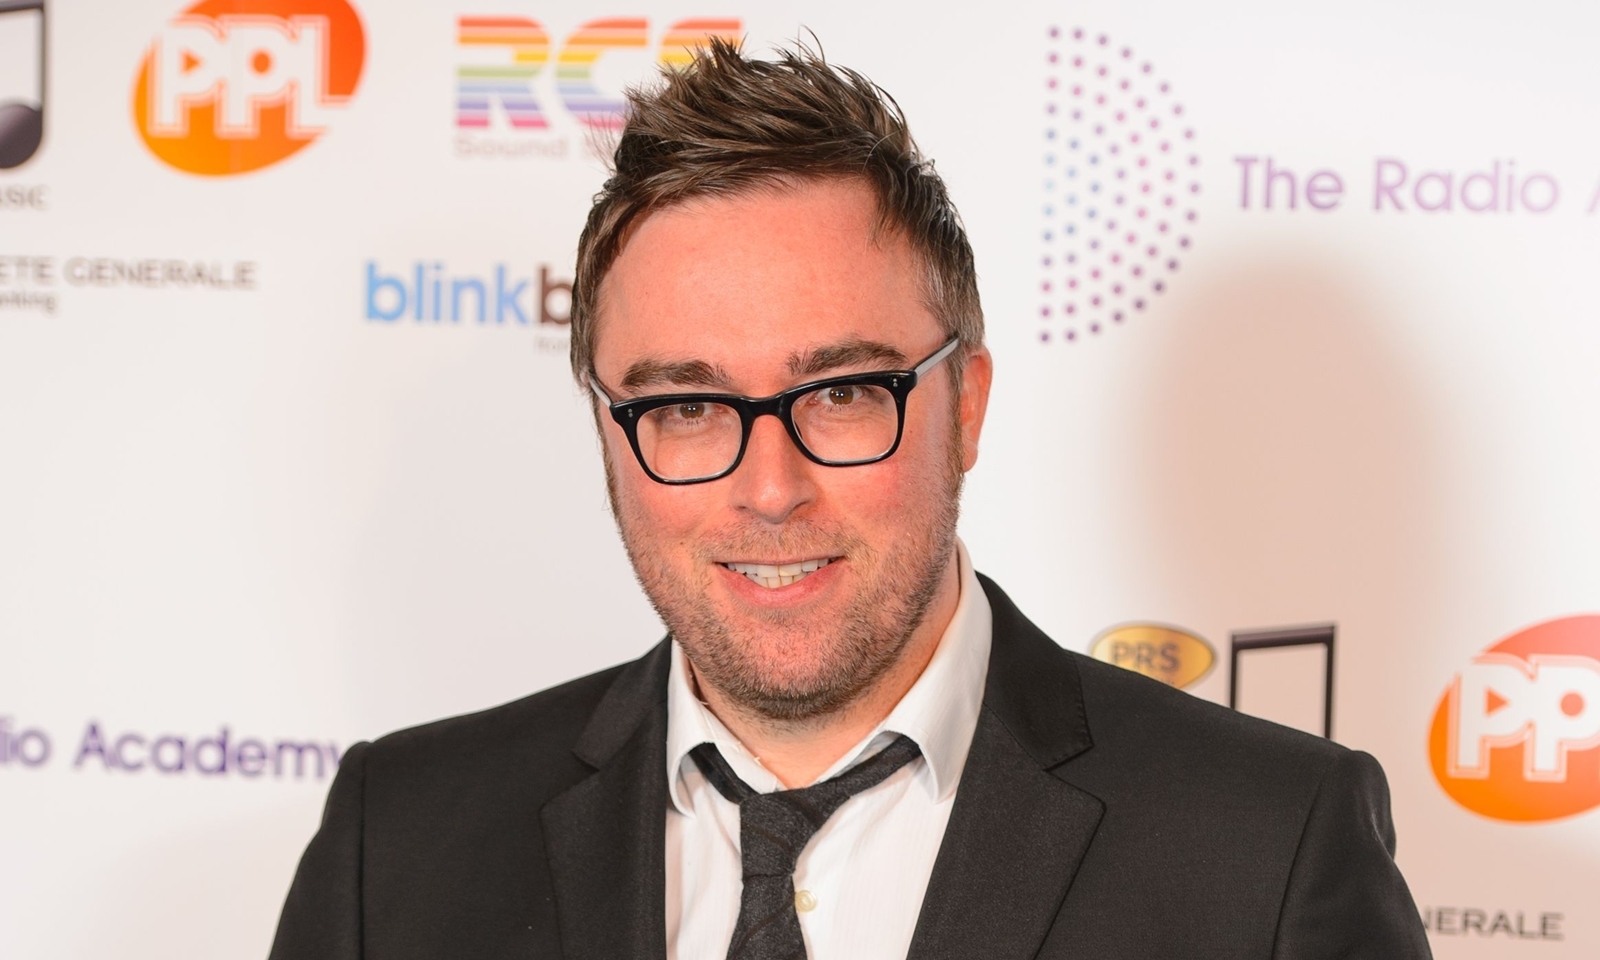 Danny Wallace arriving at the Radio Academy Awards 2014, at the Grosvenor House Hotel, in central London.